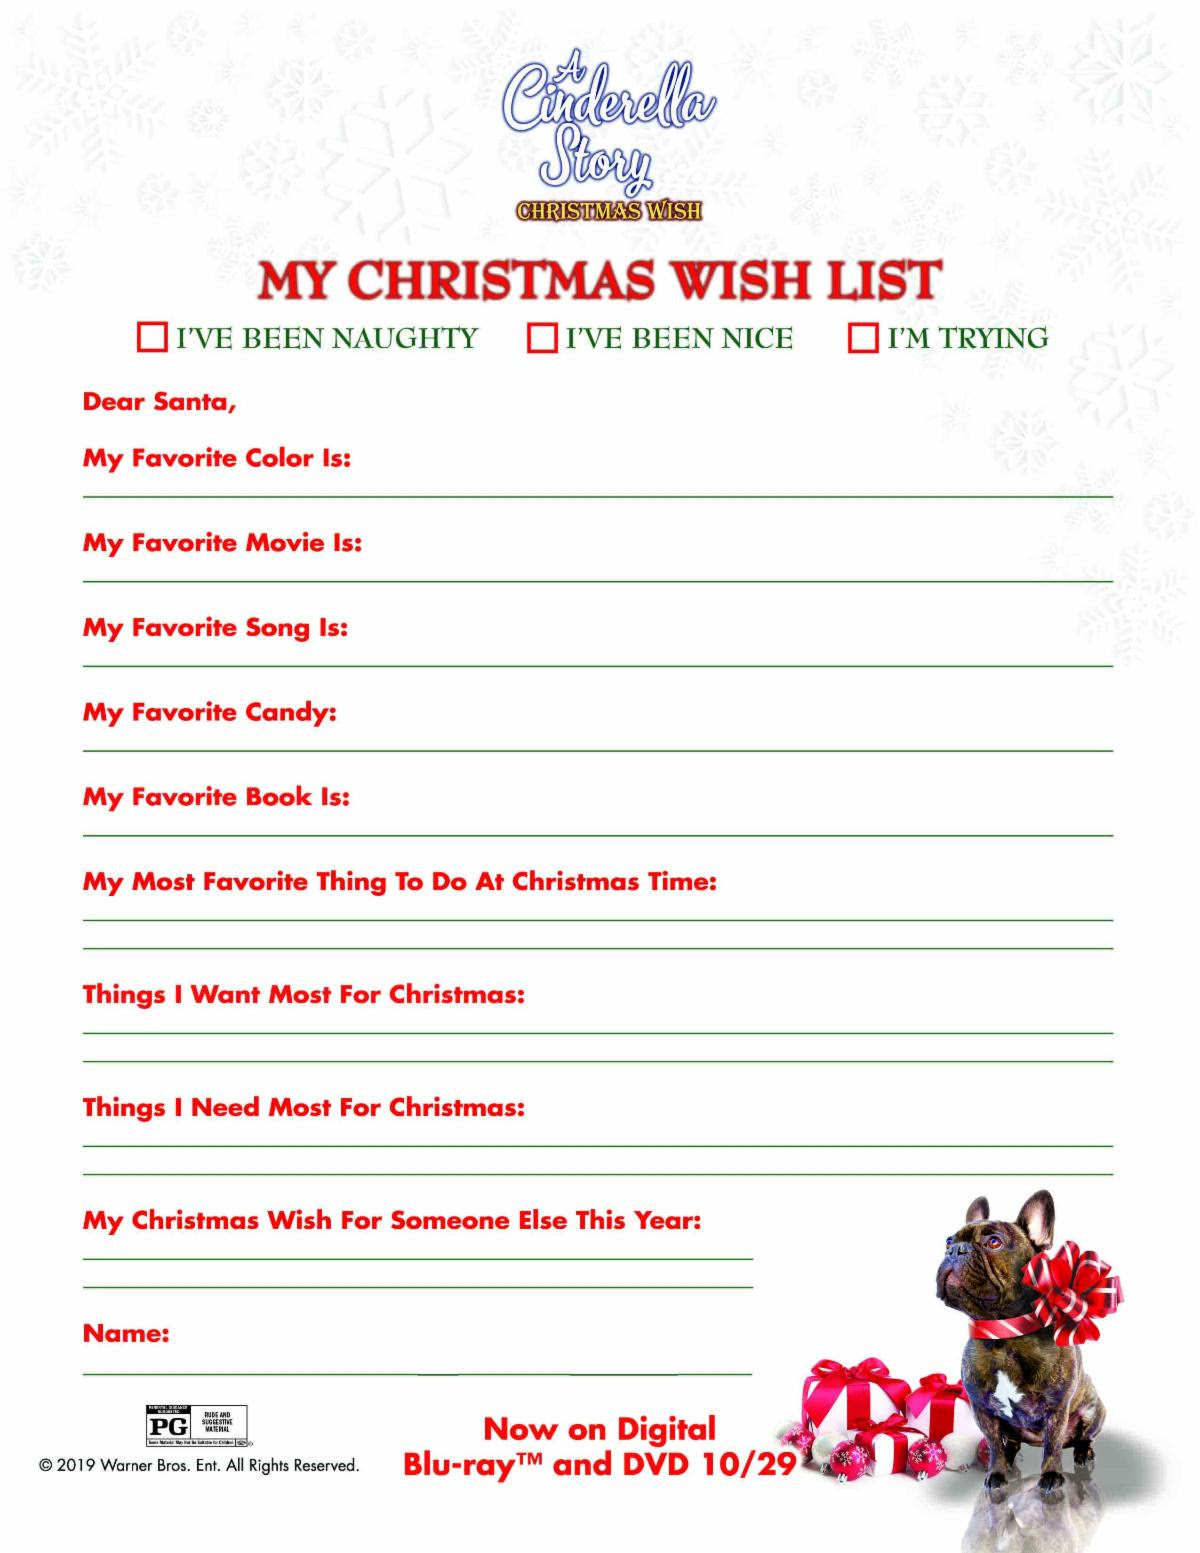 A Cinderella Story Christmas Wish Downloadable Christmas Wish List CinderellaChristmas 